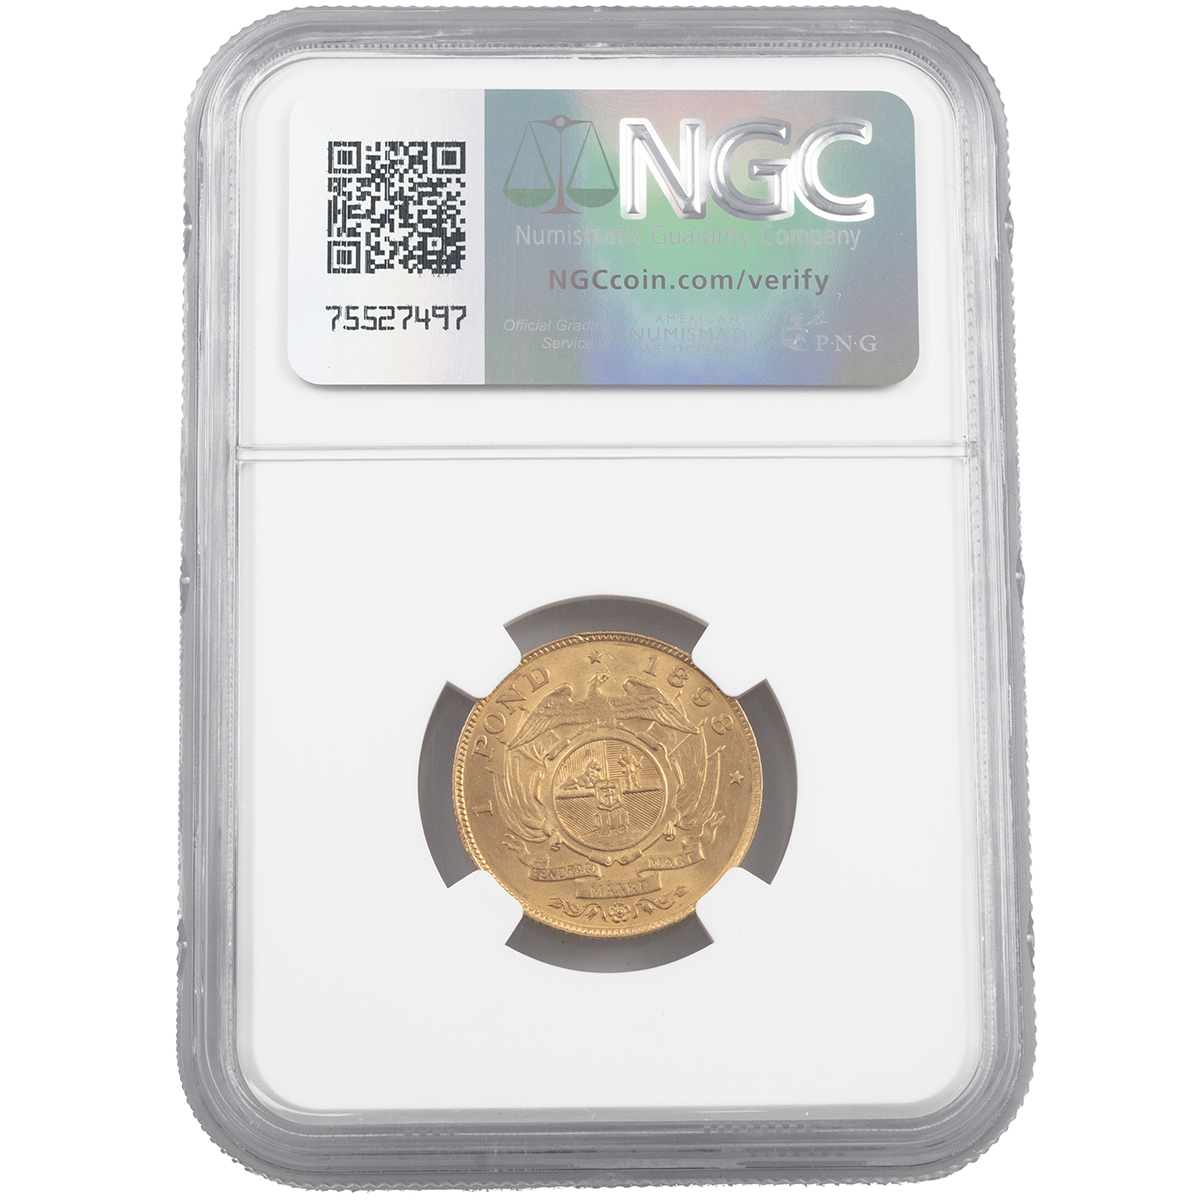 1898 South Africa Z.A.R. 22-carat gold Pond coin graded MS 62 and sealed in holder by NGC. Obvers... - Image 3 of 4